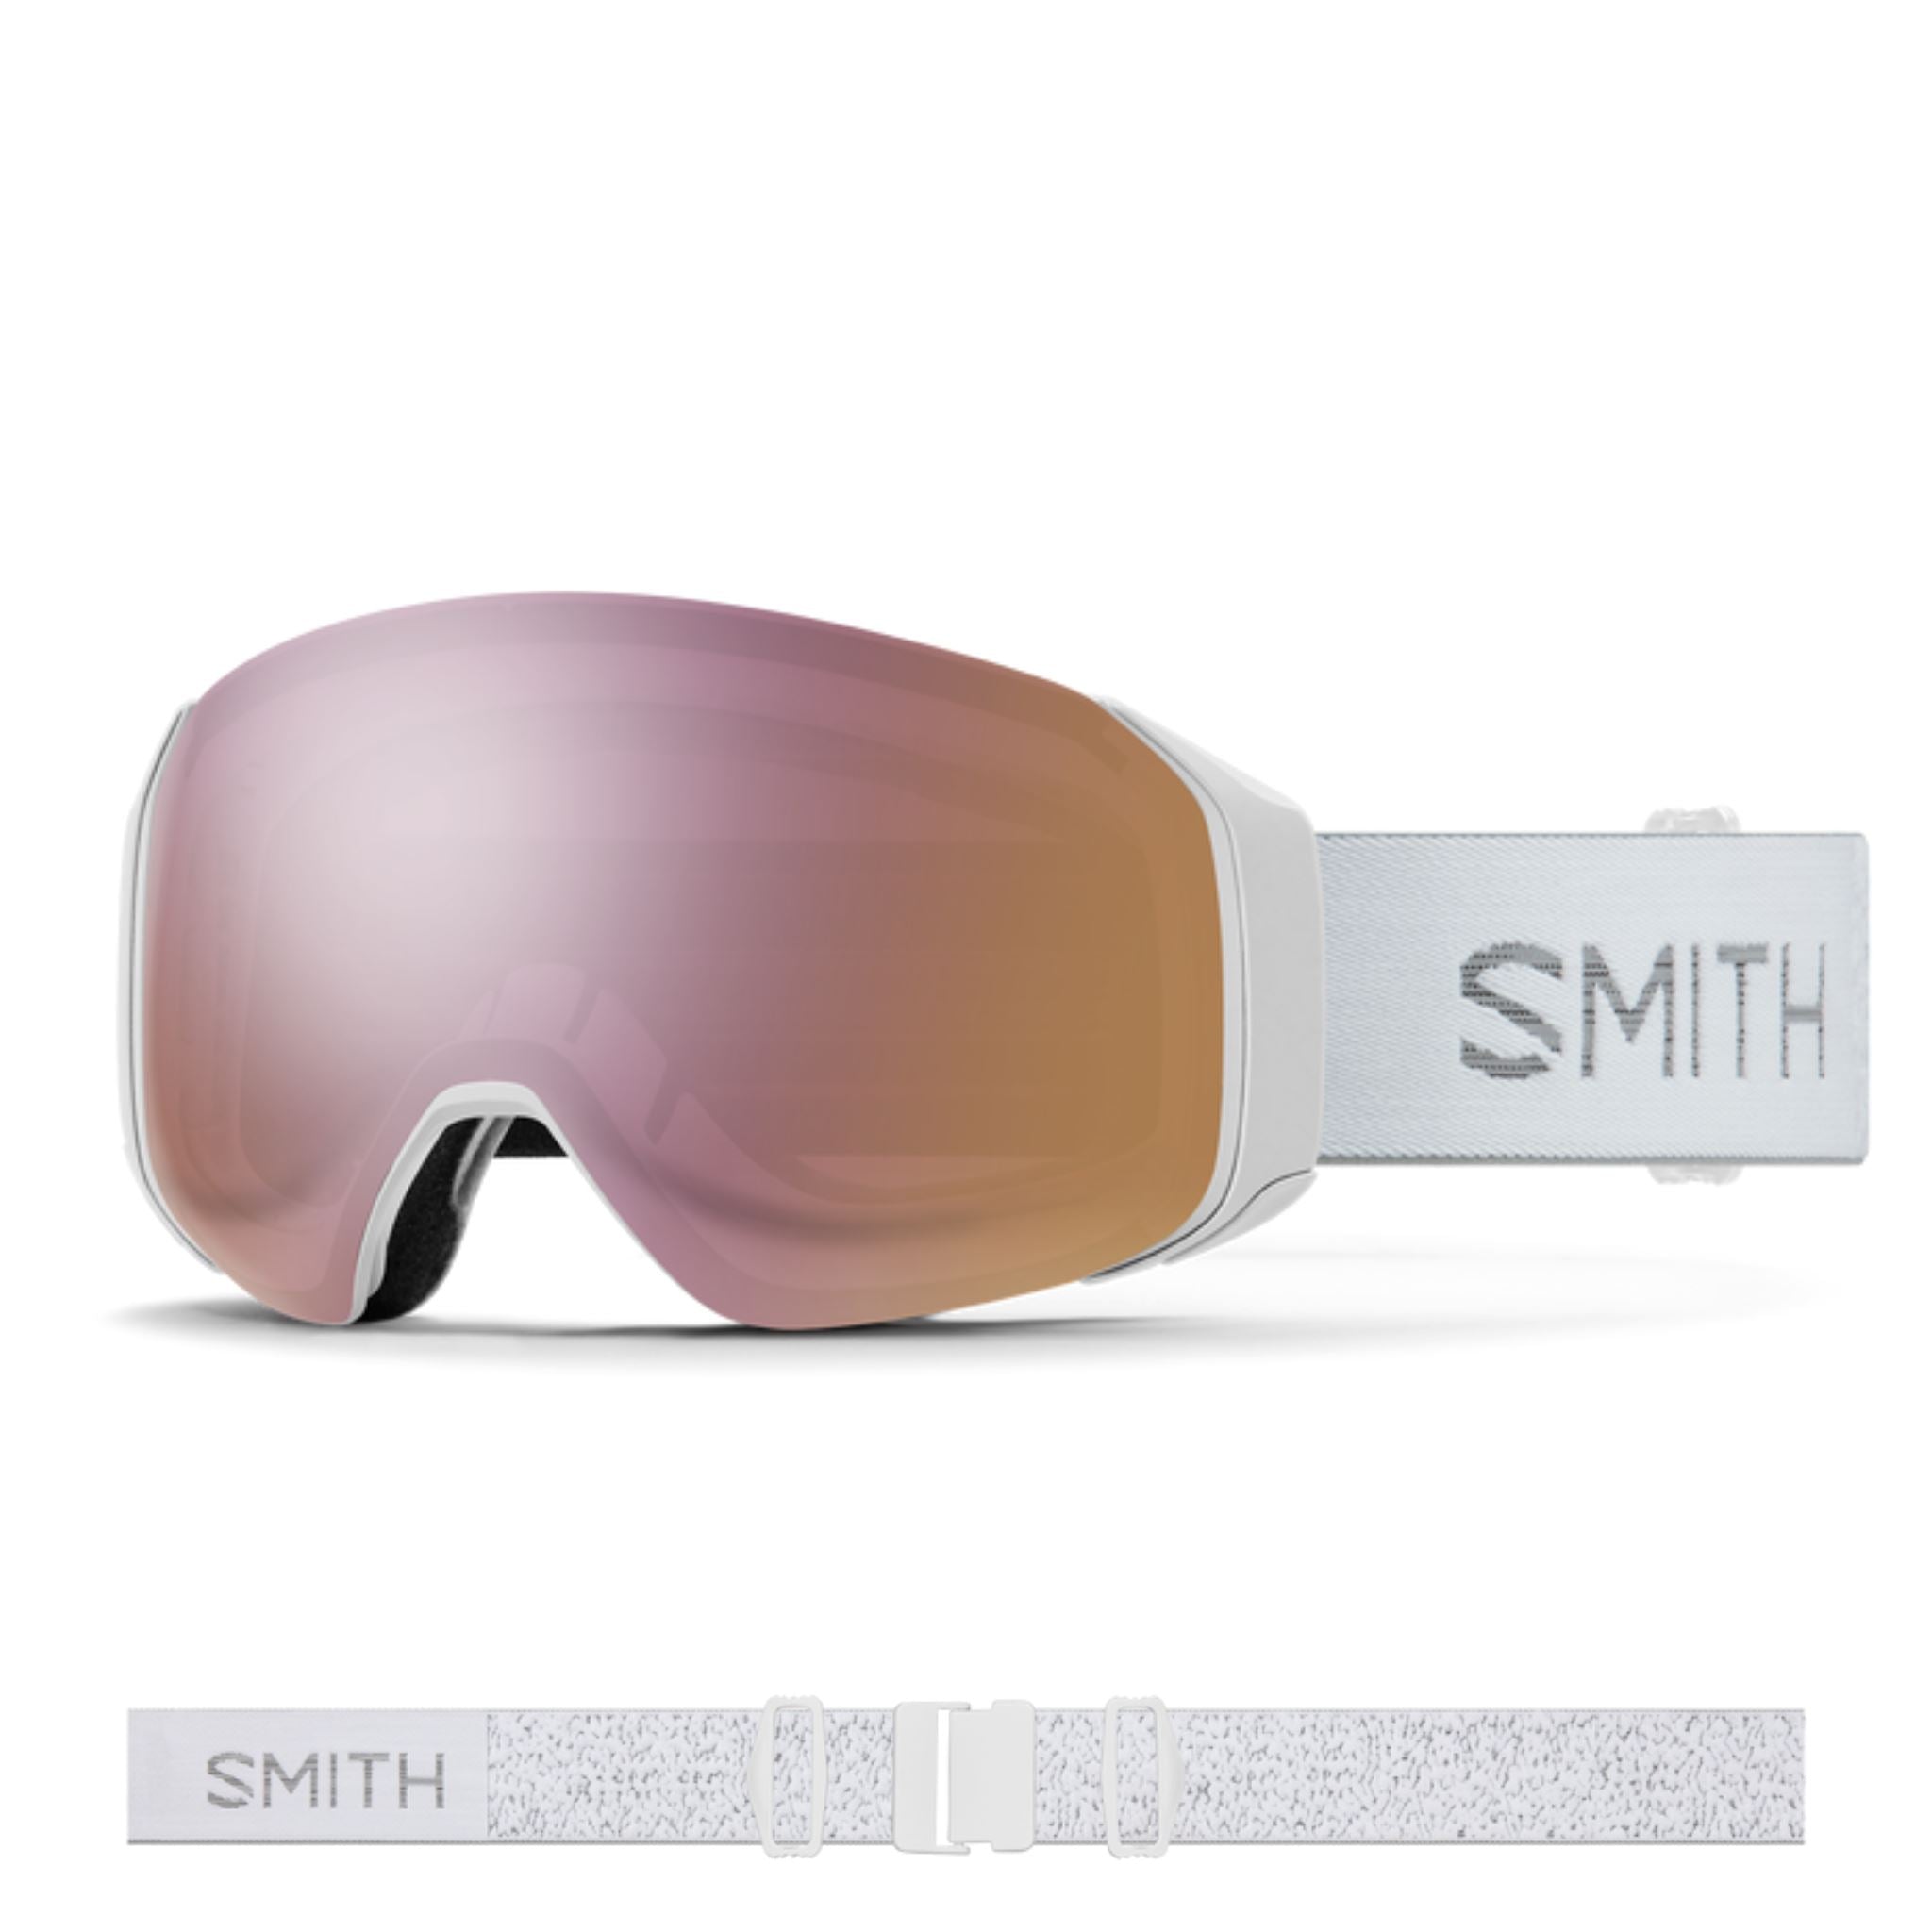 Smith 4D MAG Goggles (Small Asian Fit) - White Chunky Knit 